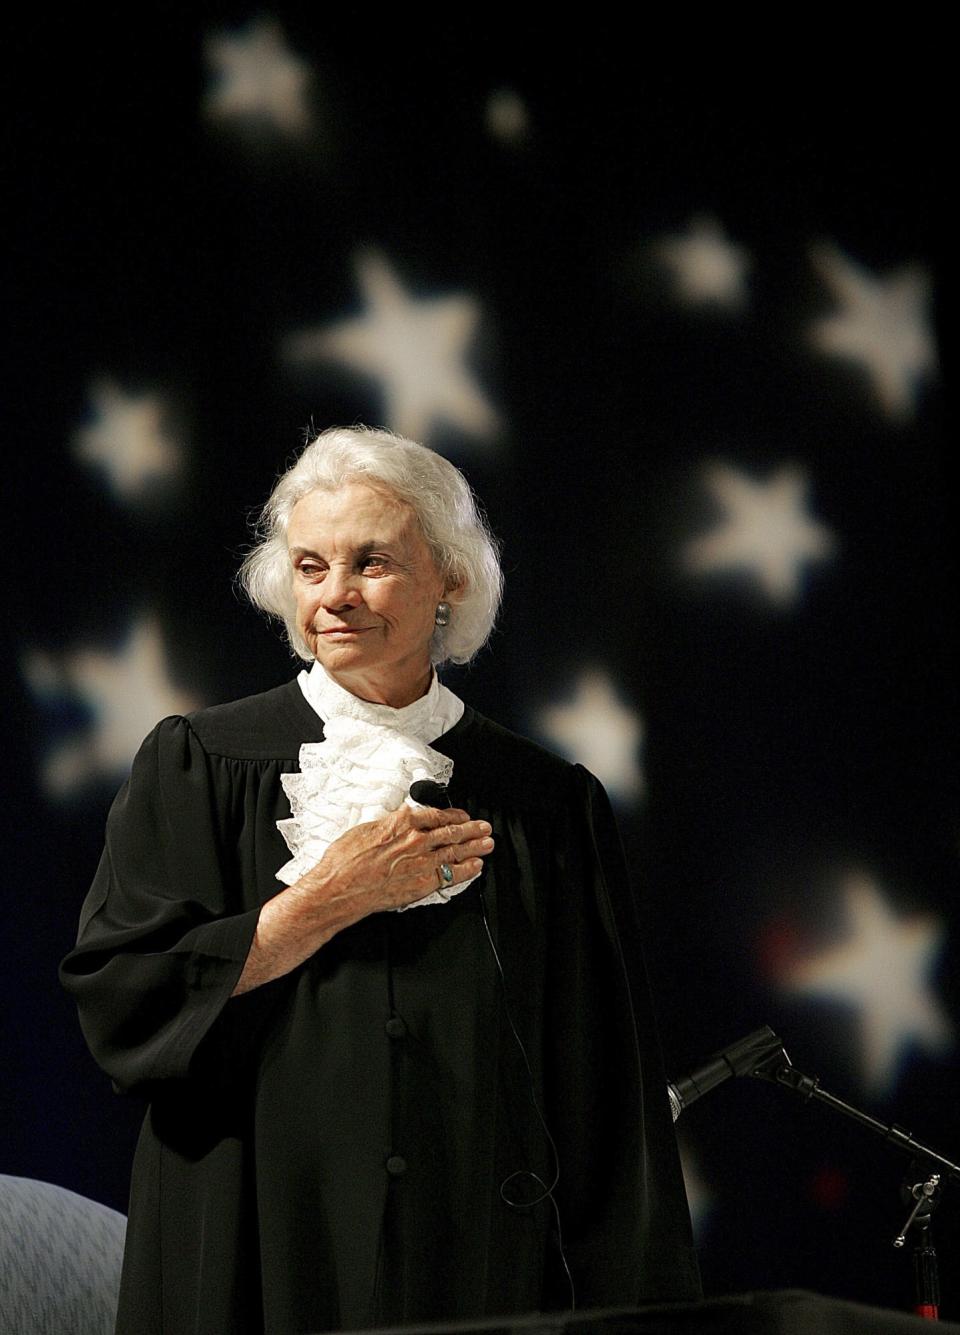 Supreme Court Justice Sandra Day O'Connor pledges allegiance to the flag in 2005 at an open-air U.S. citizenship hearing in Gilbert, Ariz.